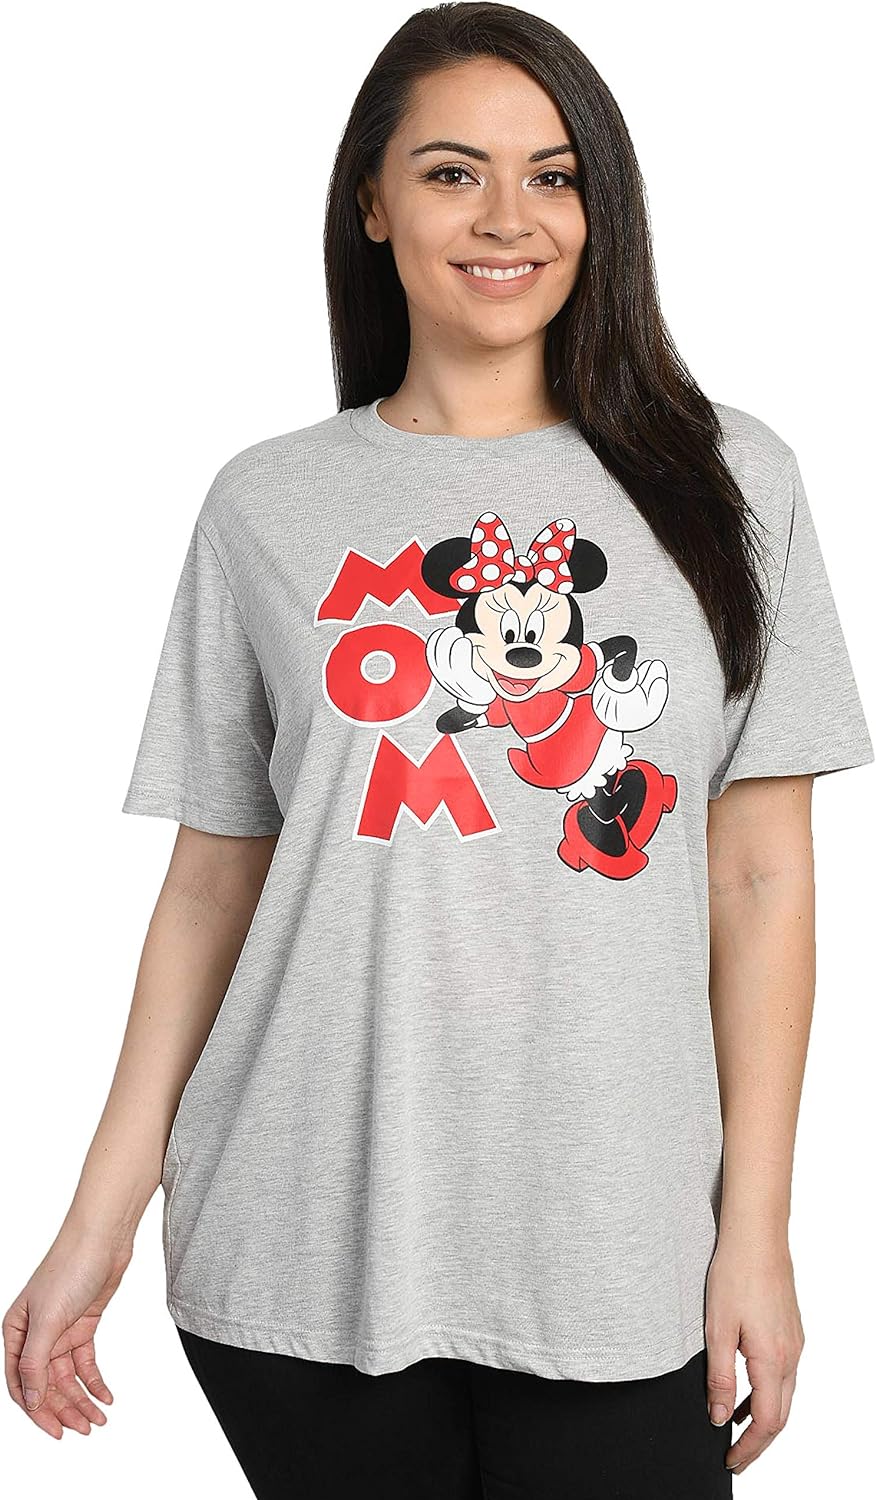 Disney Womens Plus Size T-Shirt Minnie Mouse Mickey Daisy Print - A Stylish and Fun Addition to Your Wardrobe